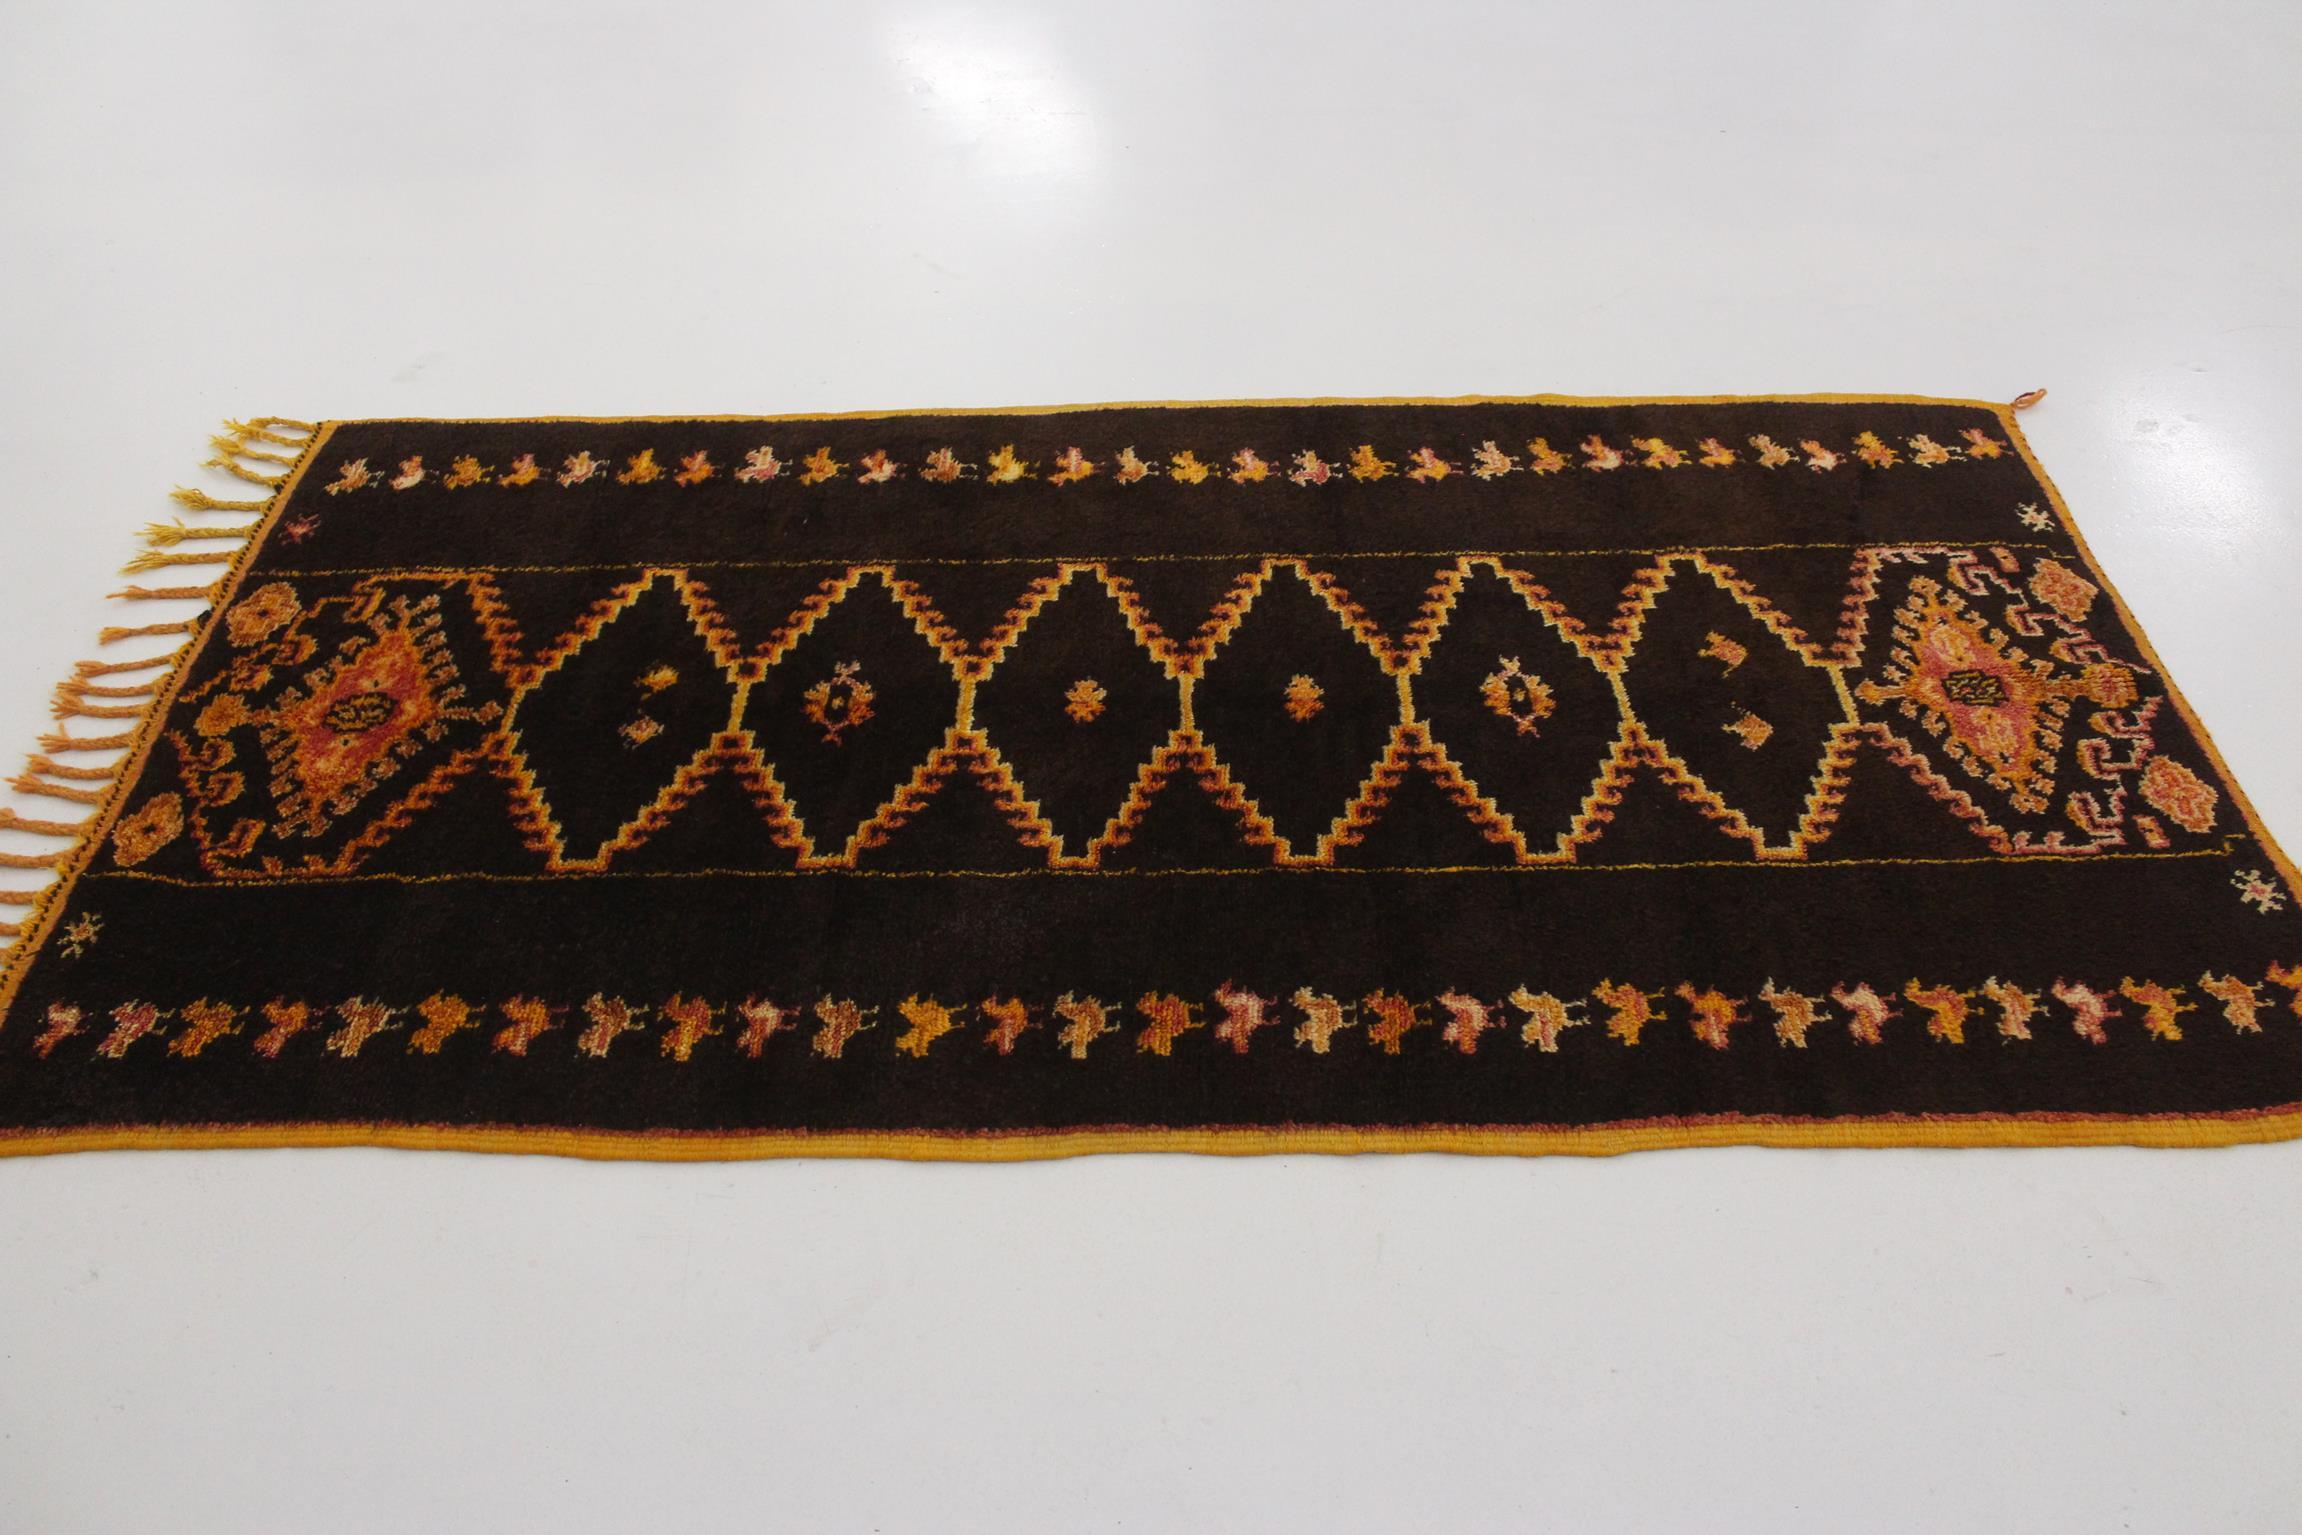 Vintage Moroccan Taznakht rug - Black/yellow - 3.3x6.4feet / 100x195cm In Good Condition For Sale In Marrakech, MA